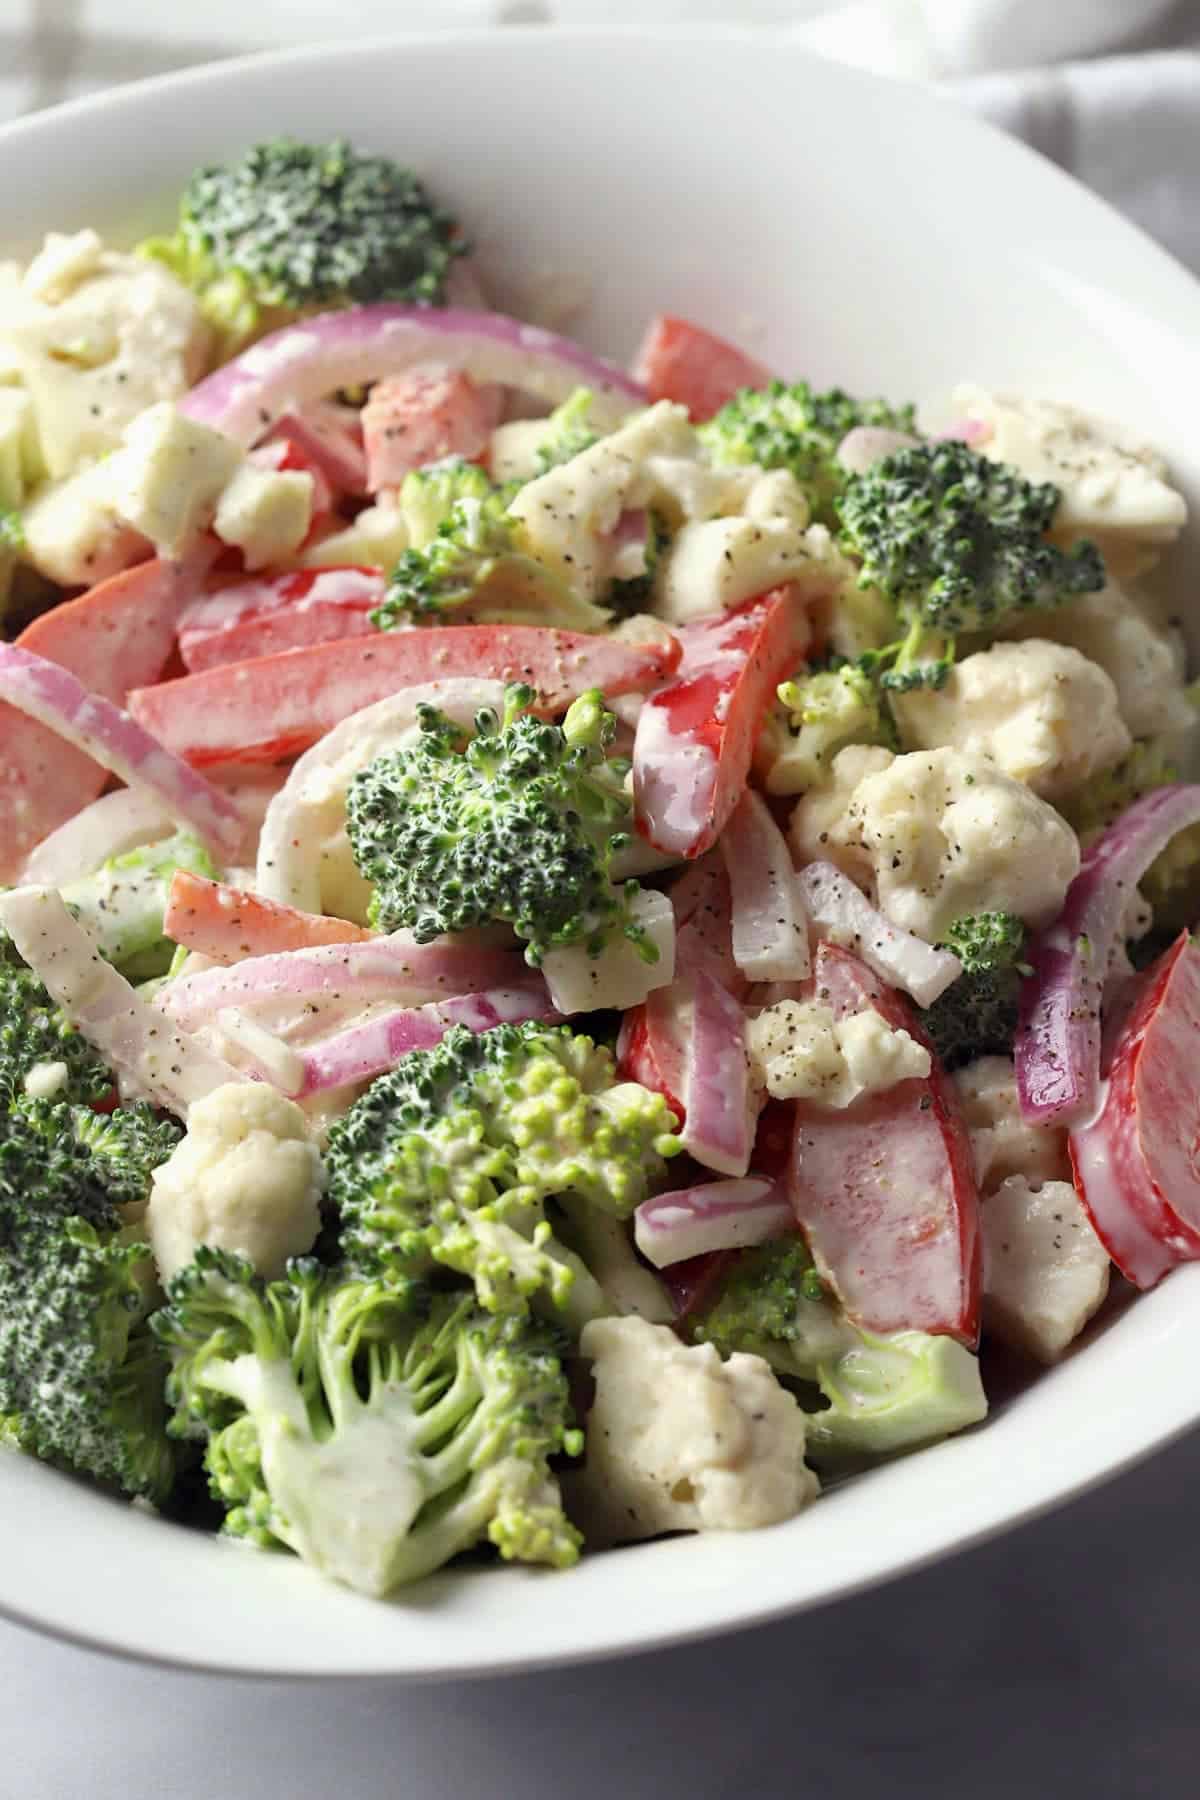 Broccoli and cauliflower tossed in dressing.